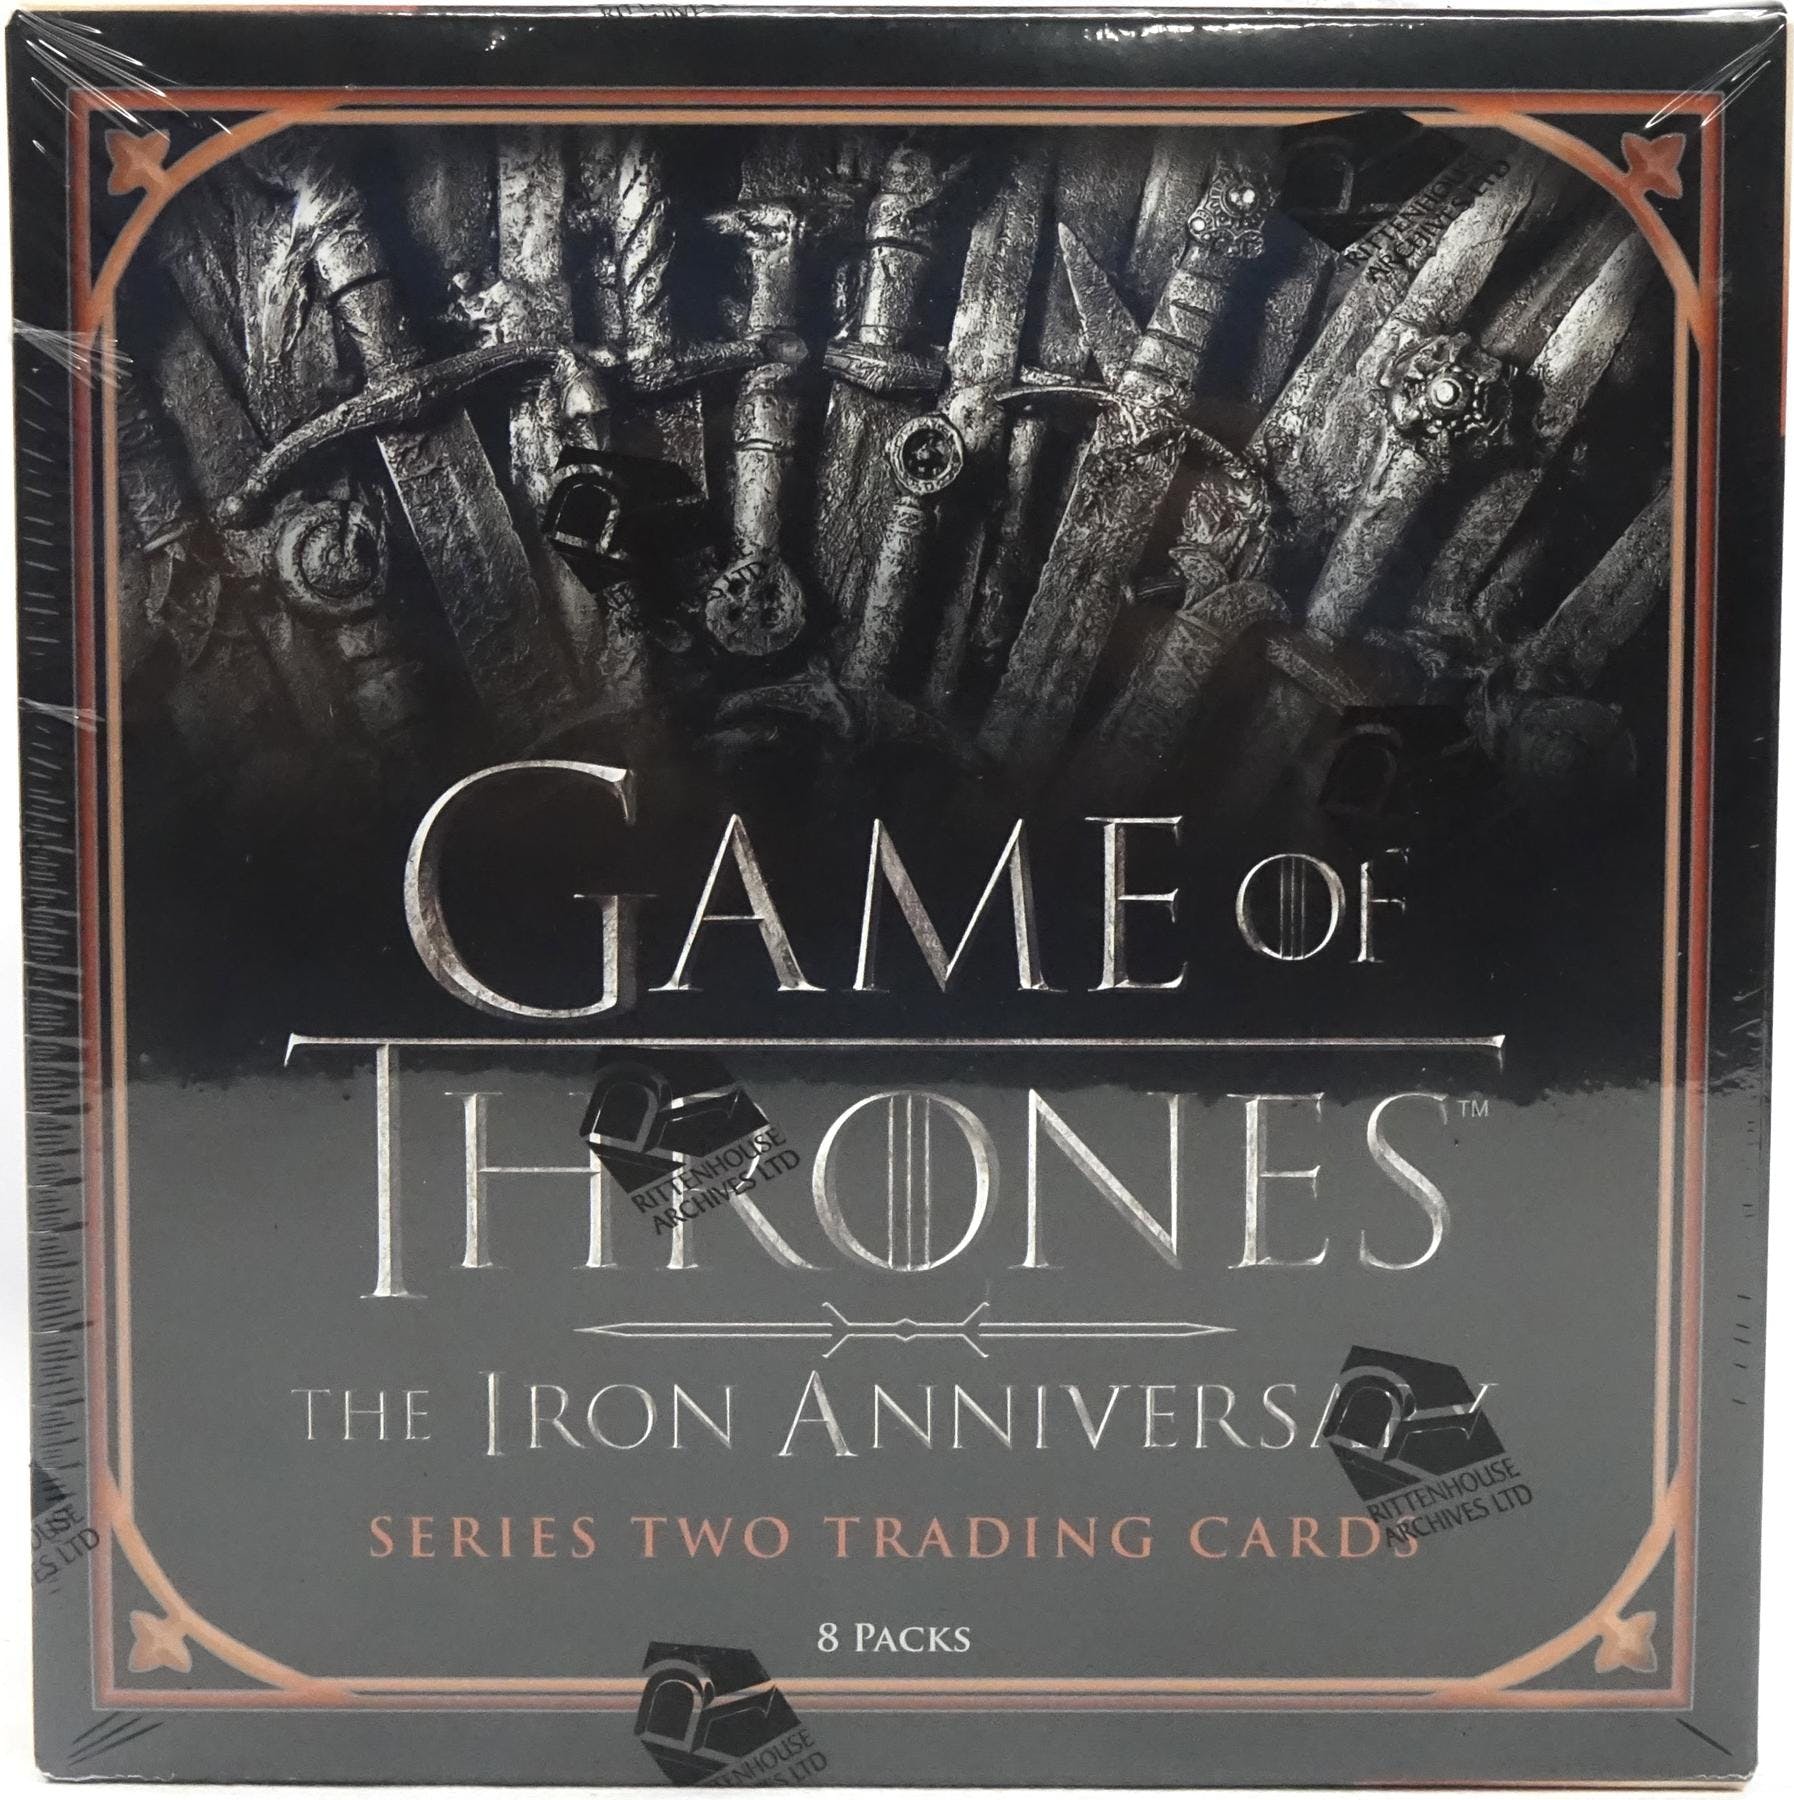 Game Of Thrones Iron Anniversary Series 2 Trading Card Box